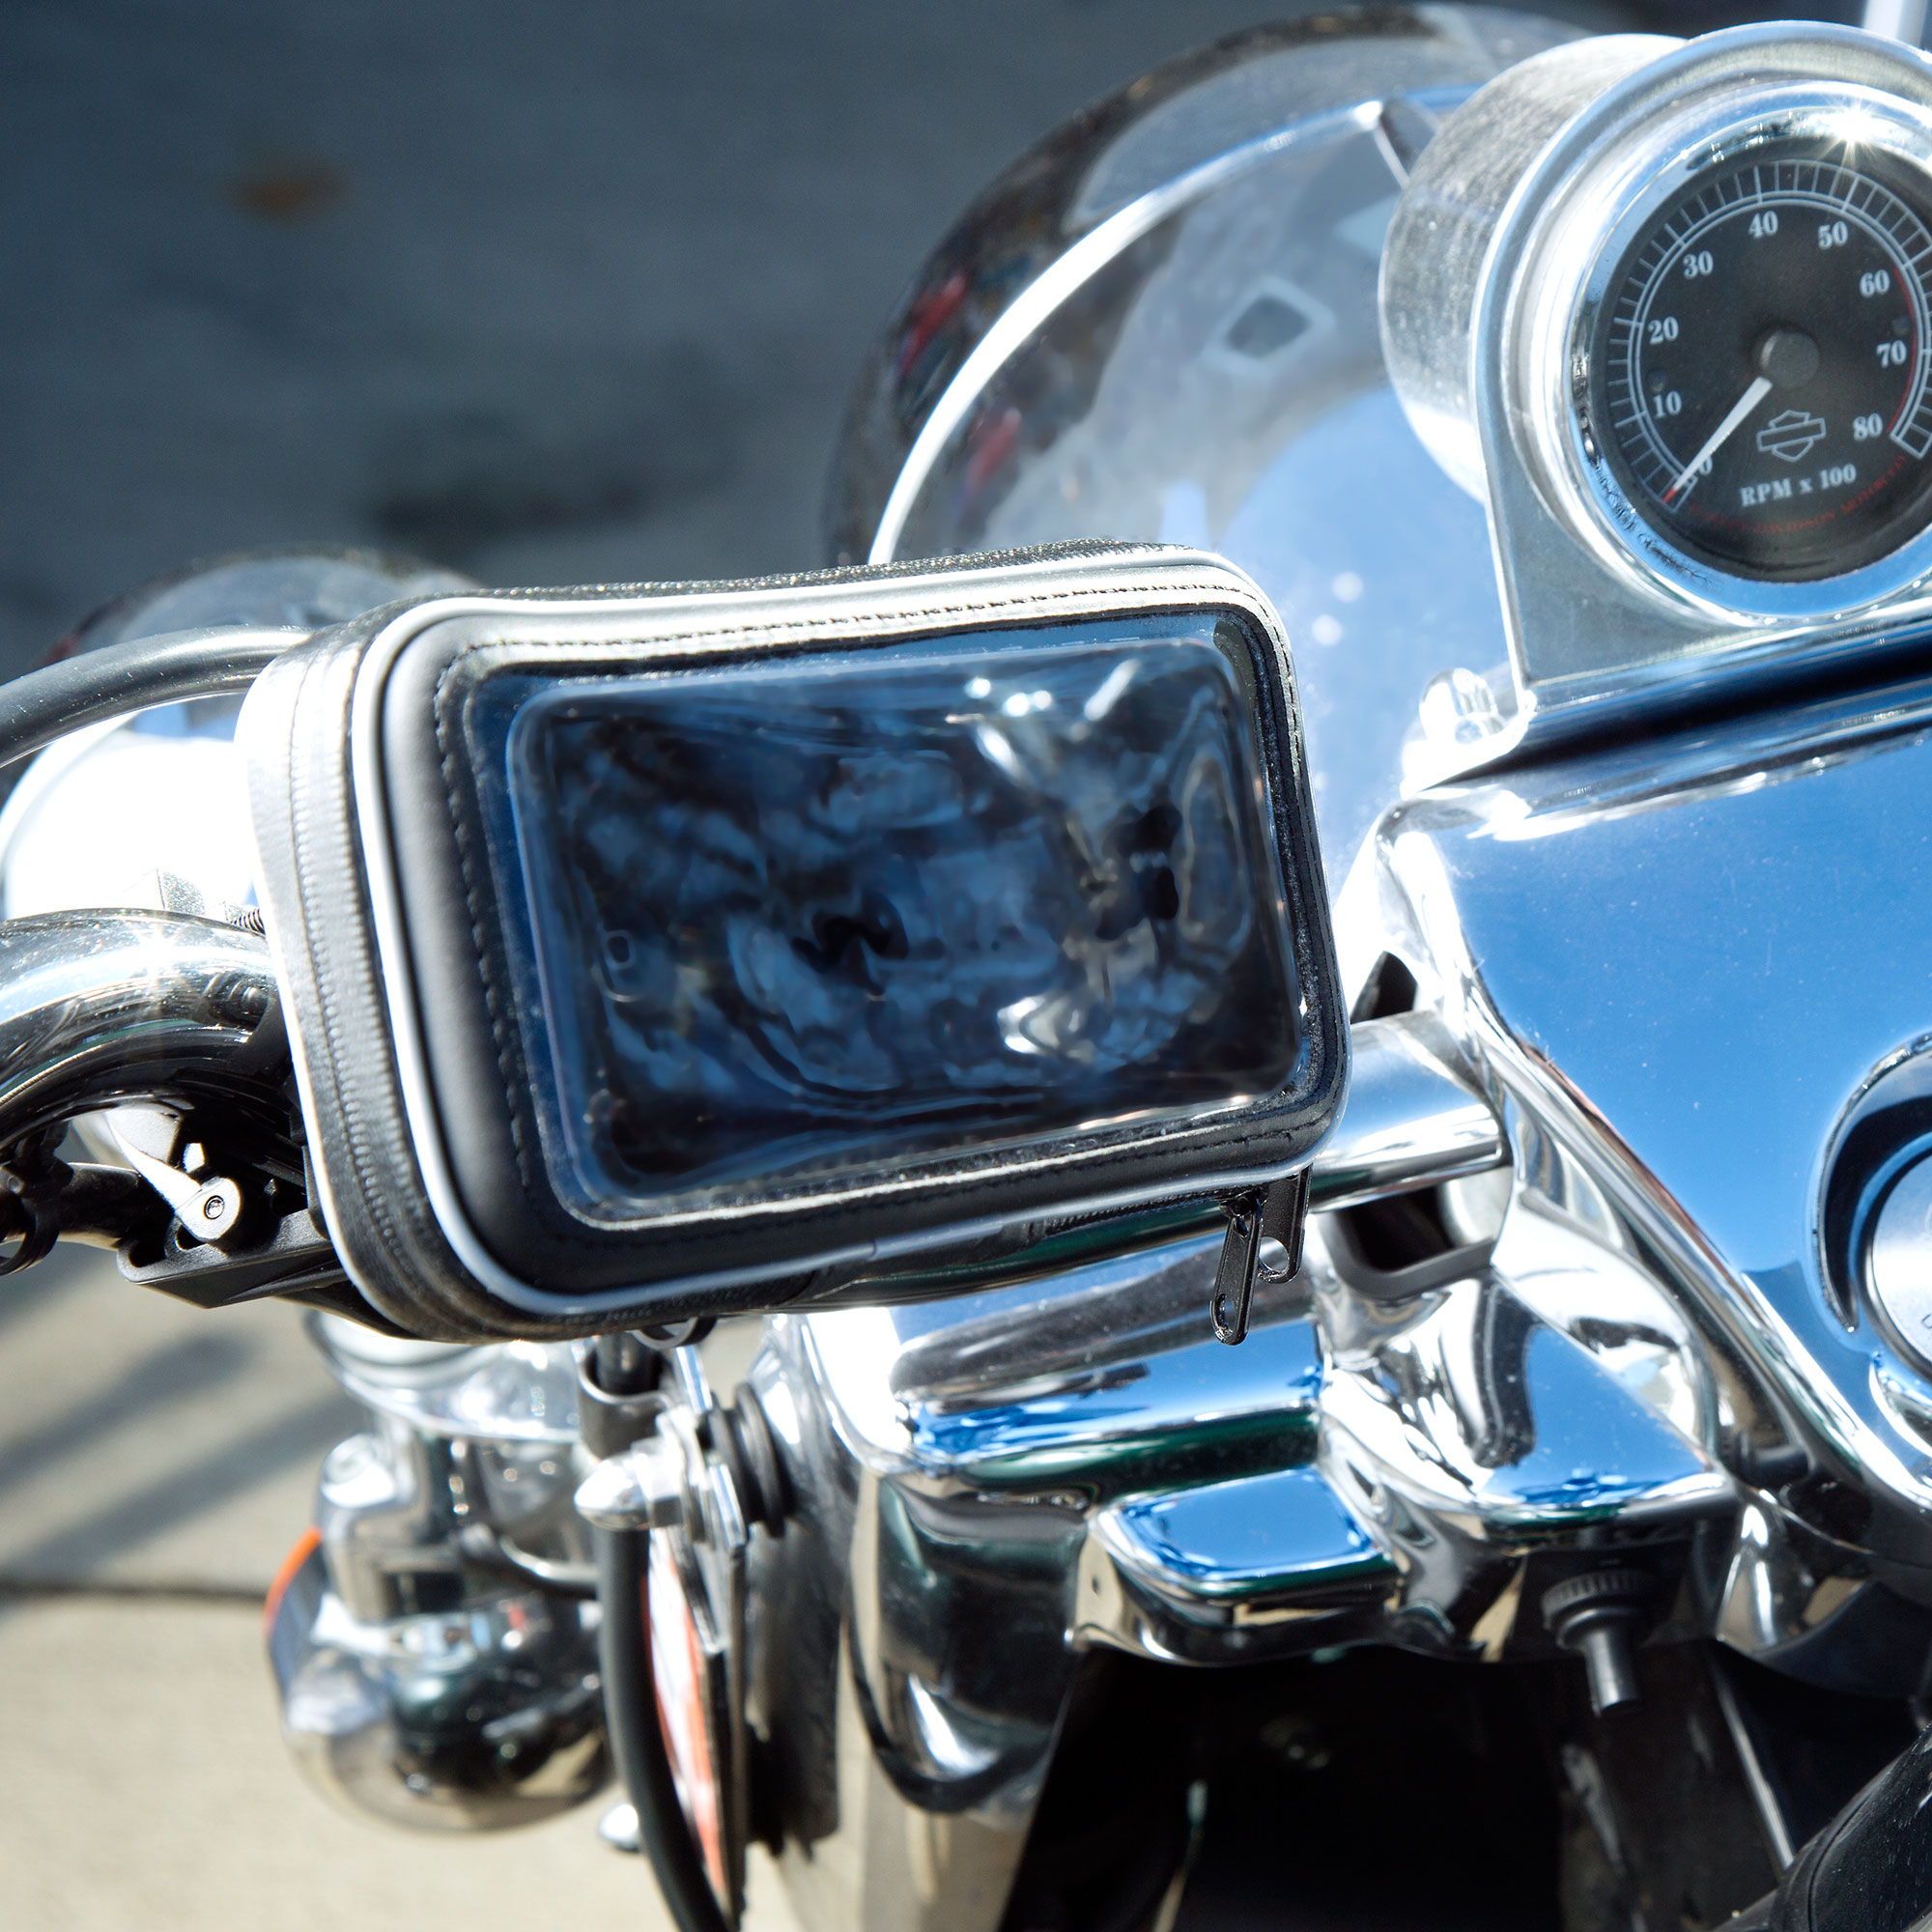 Heavy Duty Weather Resistant Bicycle / Motorcycle Handlebar Mount Holder Designed for the LG Mini